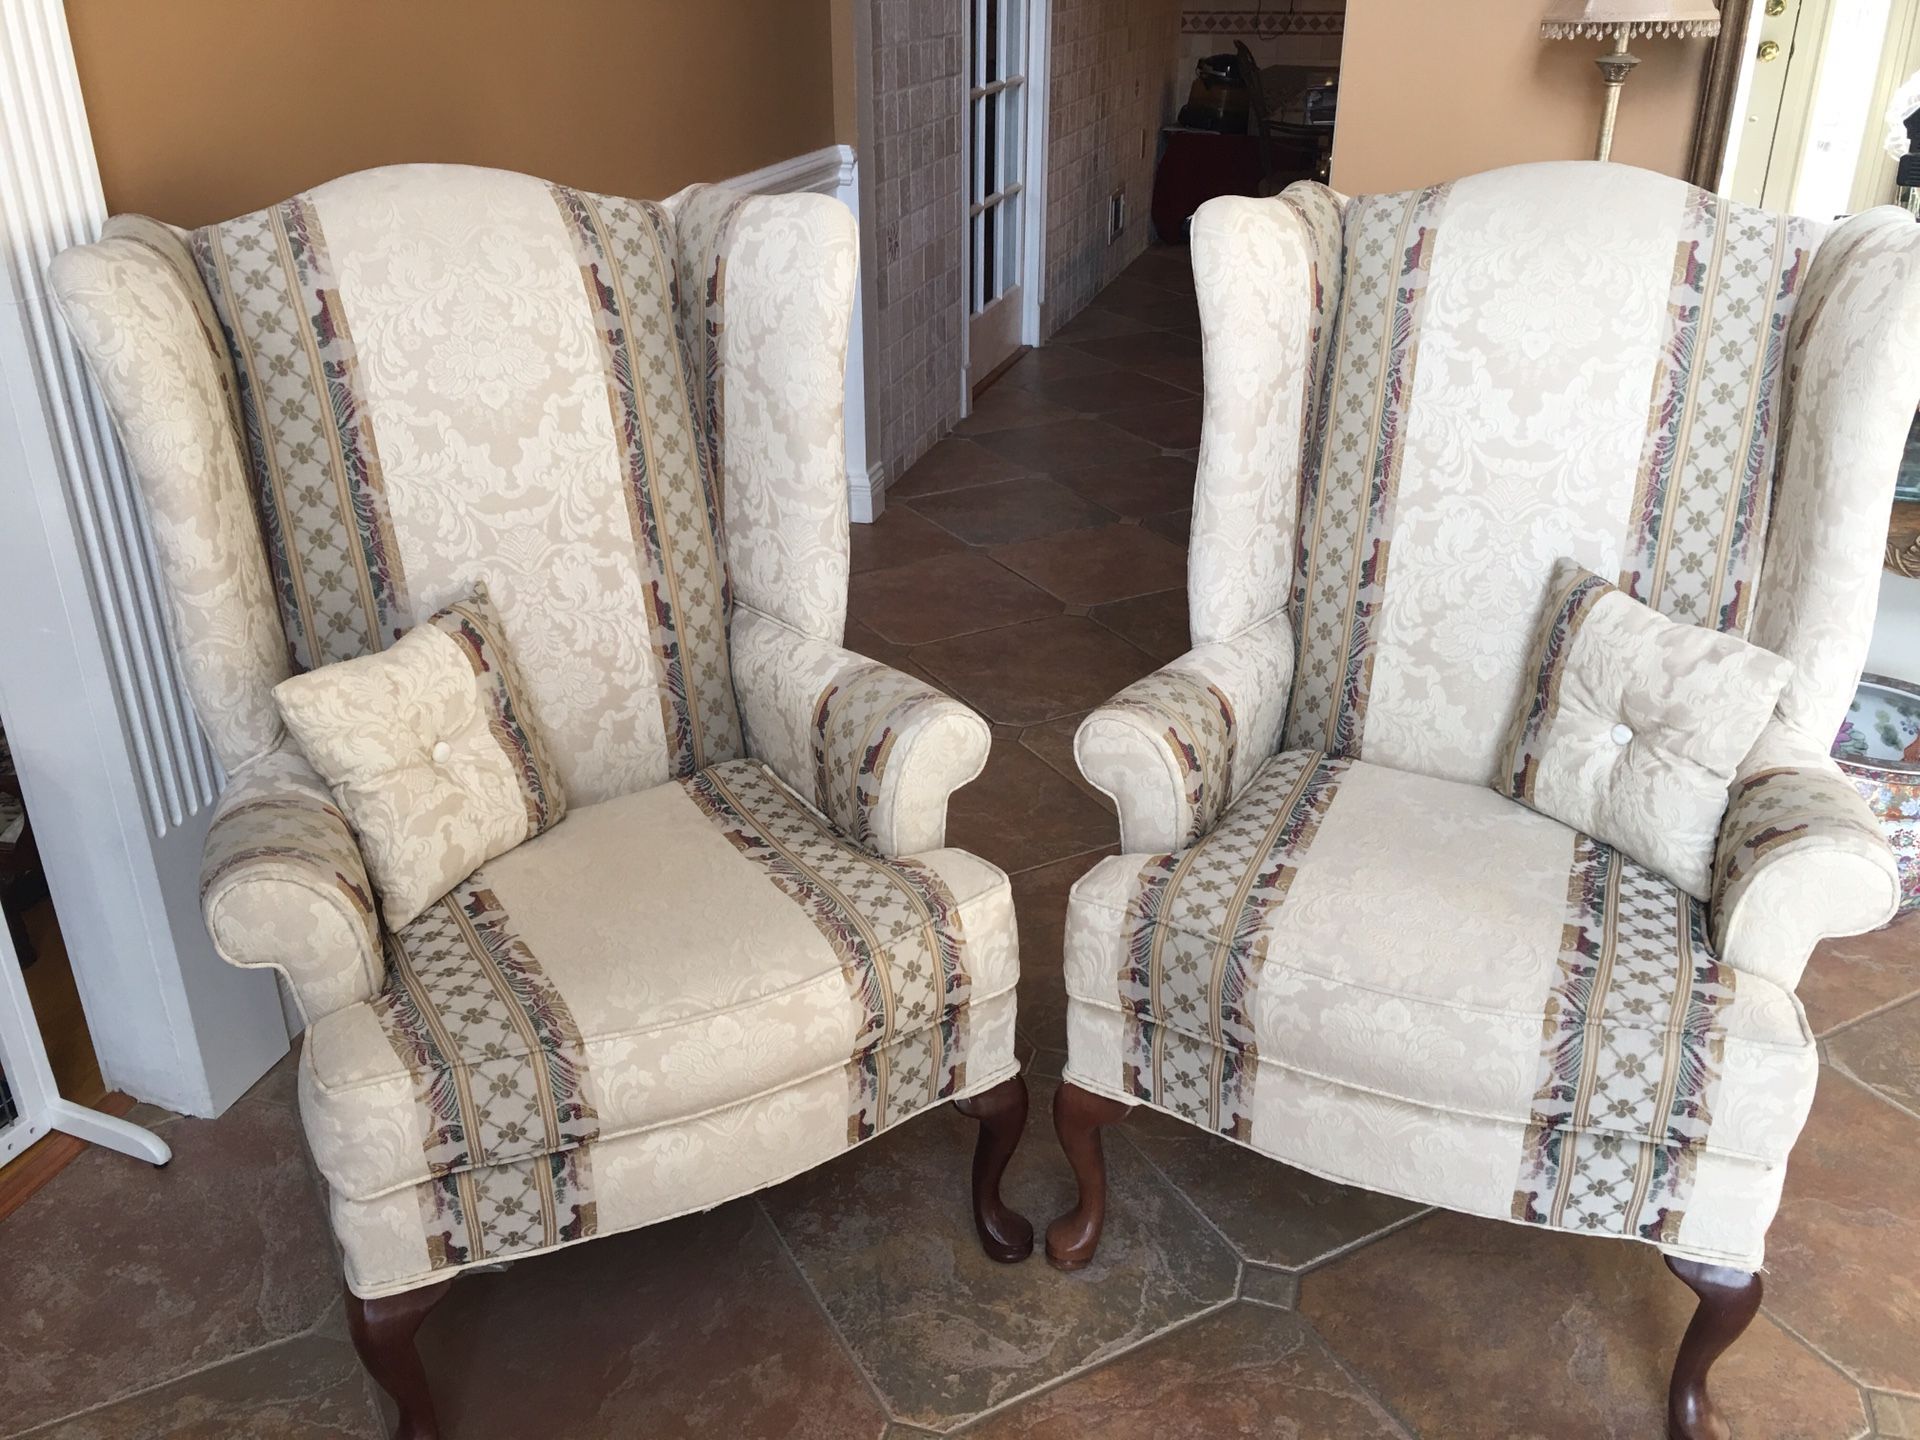 Wing back chairs, very good condition. Hardly used just for show.